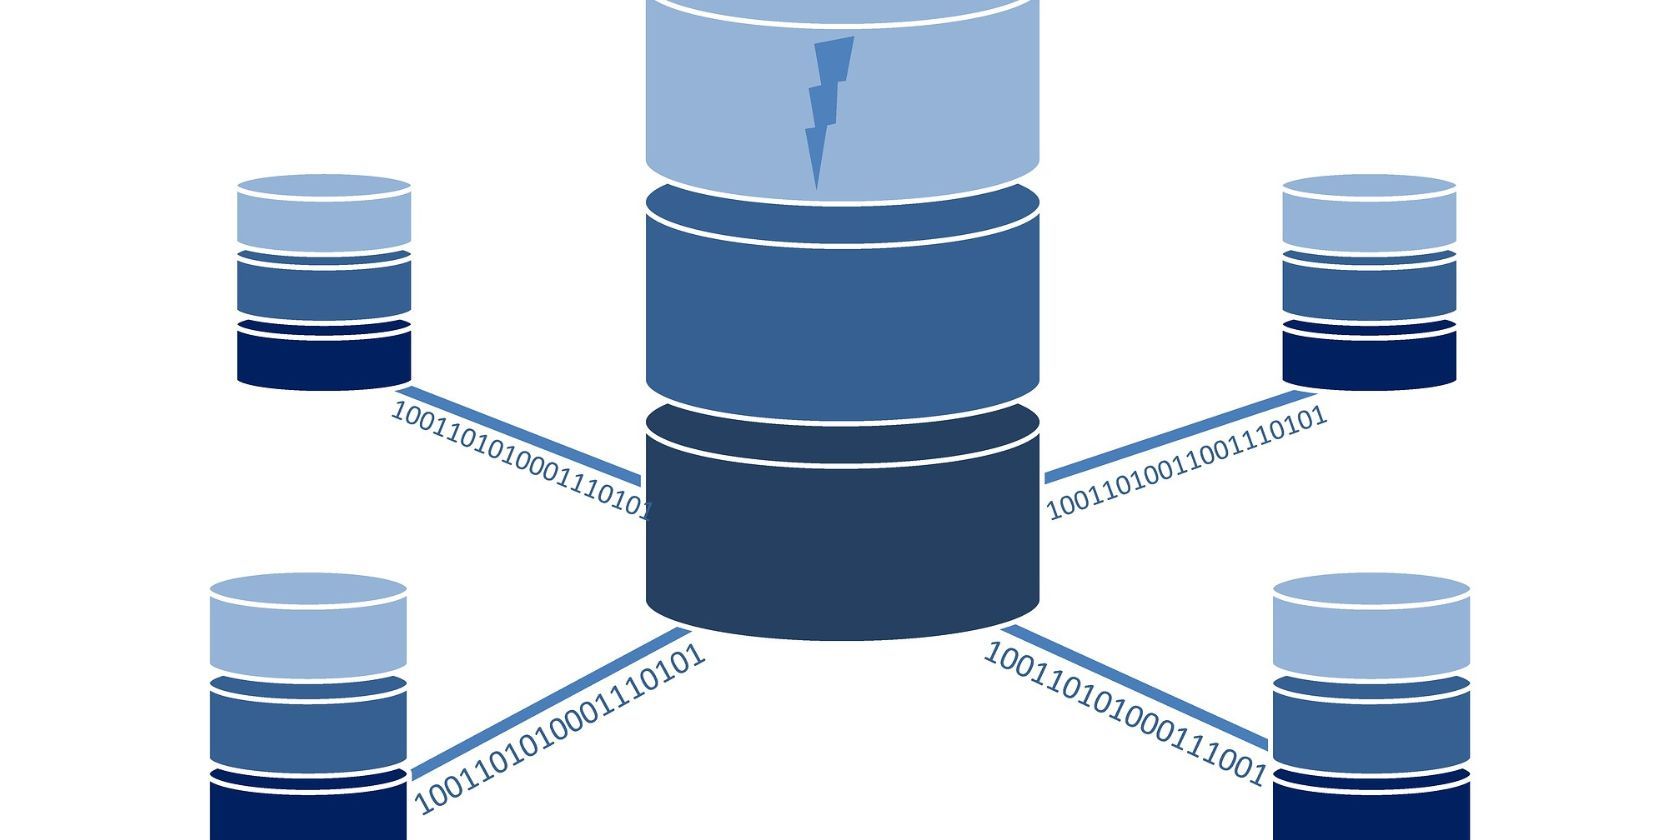 A diagram showing four components connecting to a central database server